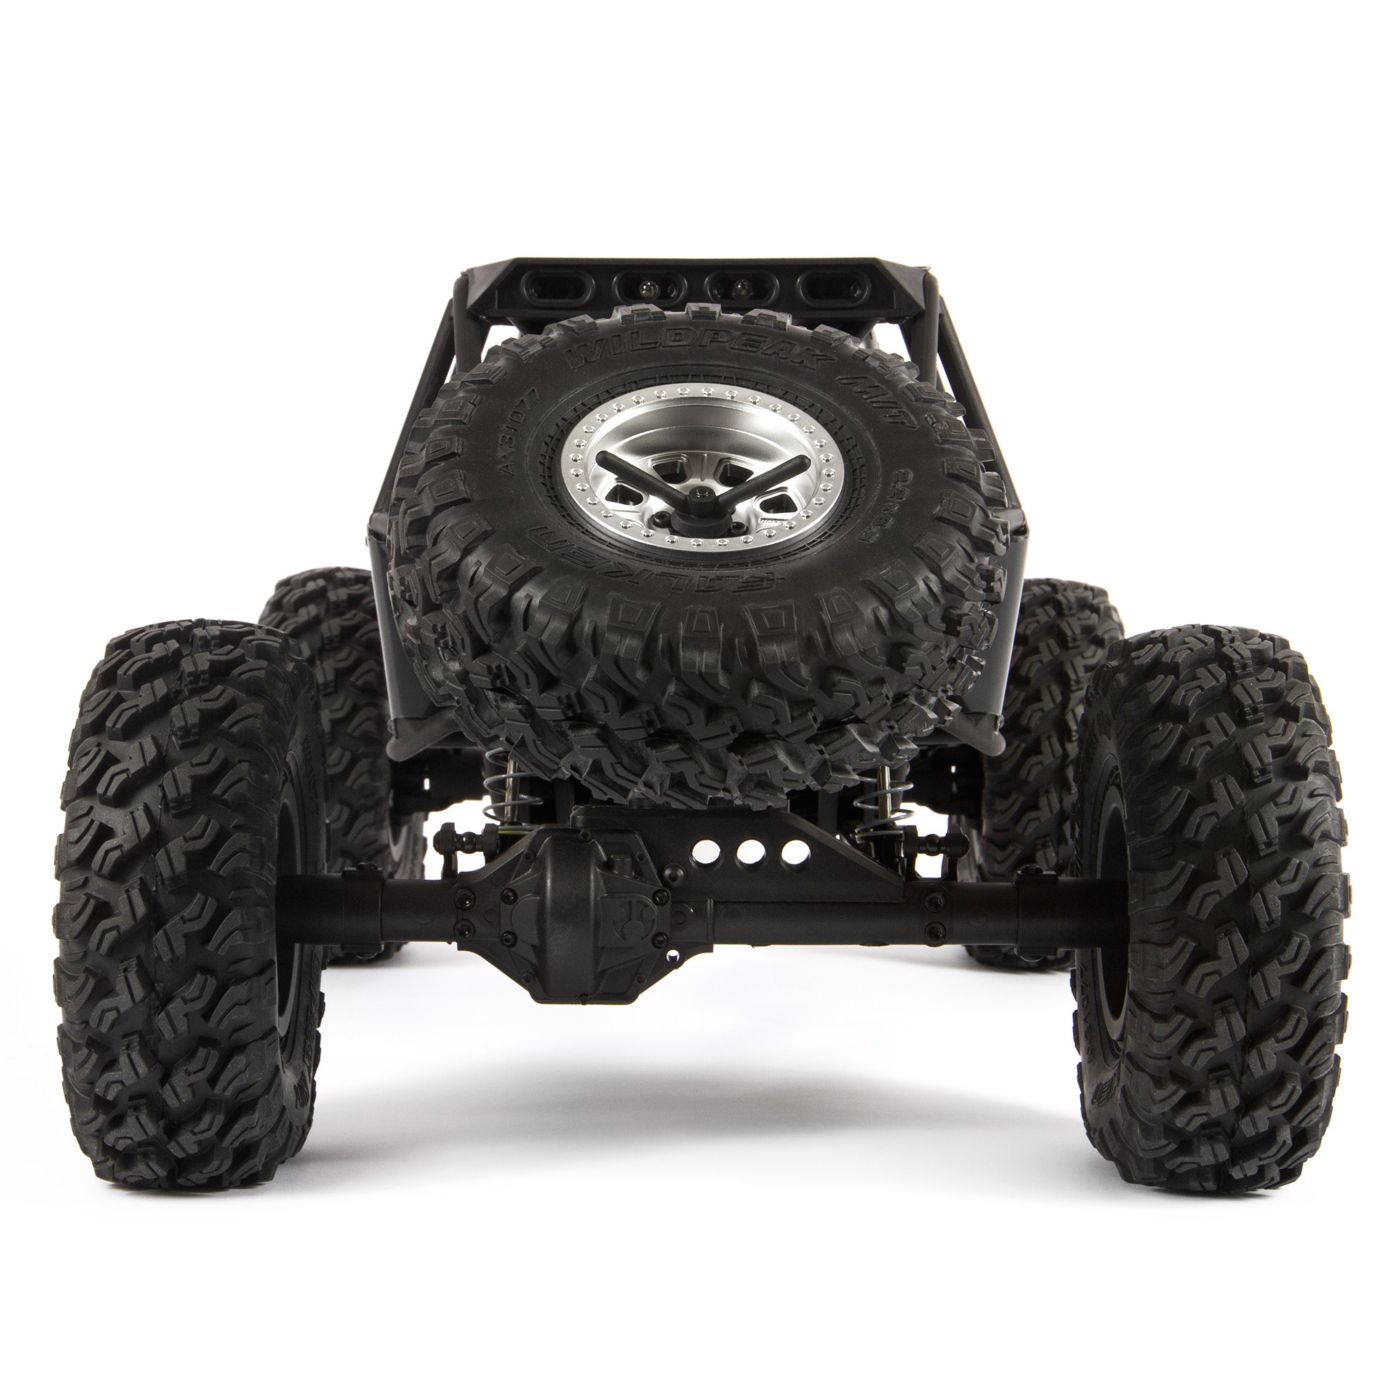 Axial AXI03016T2 RR10 Bomber 1/10 4WD Rock Racer, Grey - Dirt Cheap RC SAVING YOU MONEY, ONE PART AT A TIME